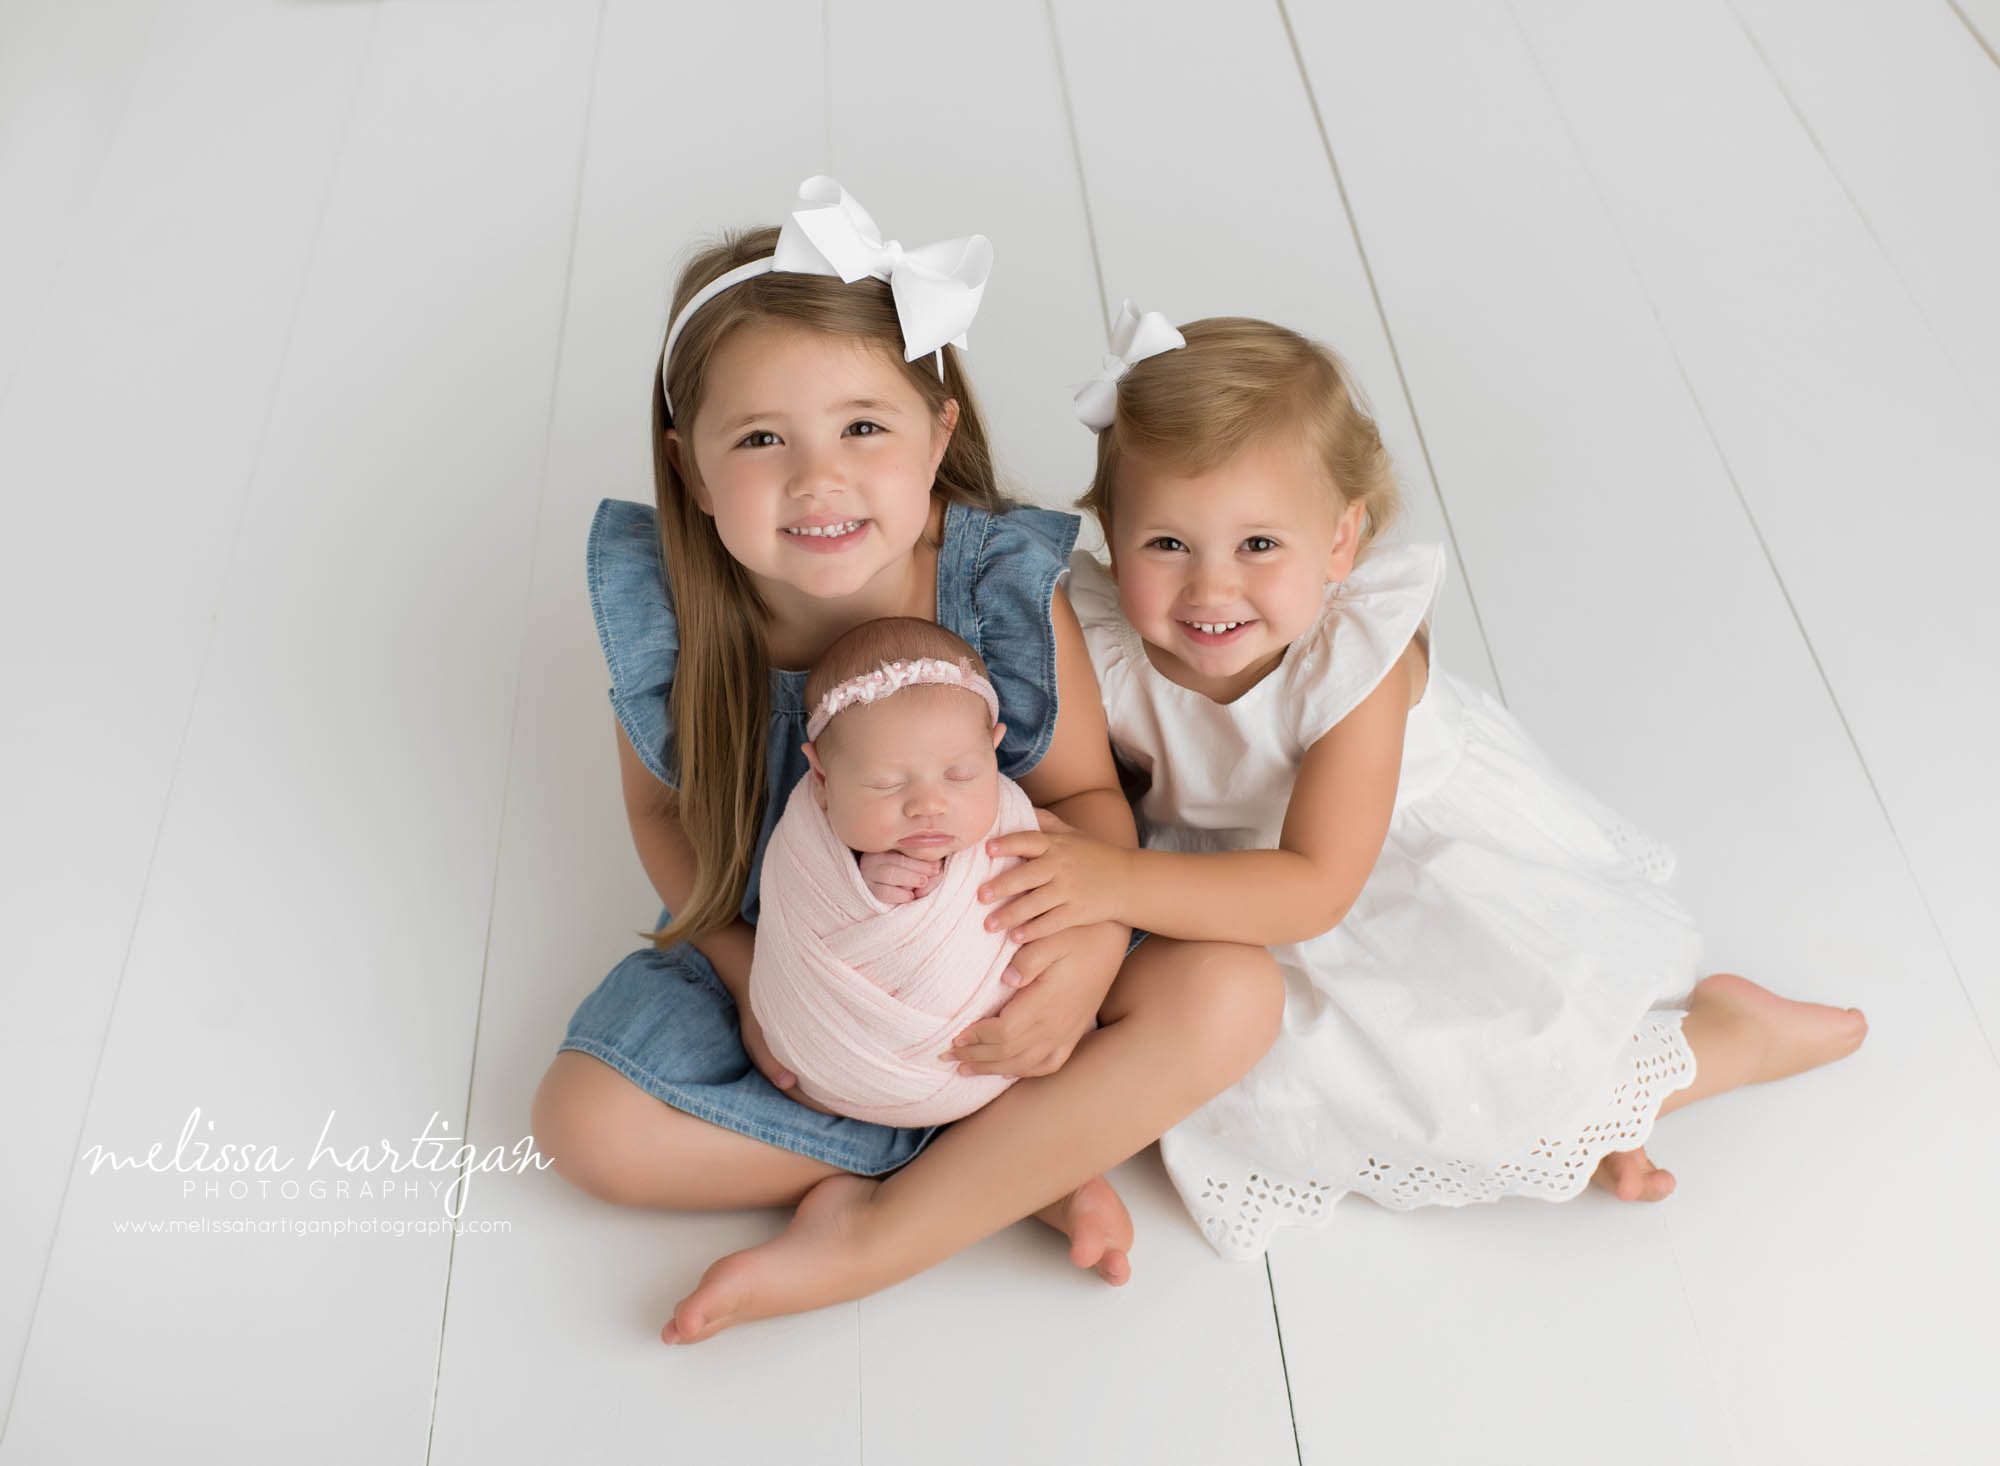 big sister and little sister holding newborn baby sister in sibling photo newborn photography CT